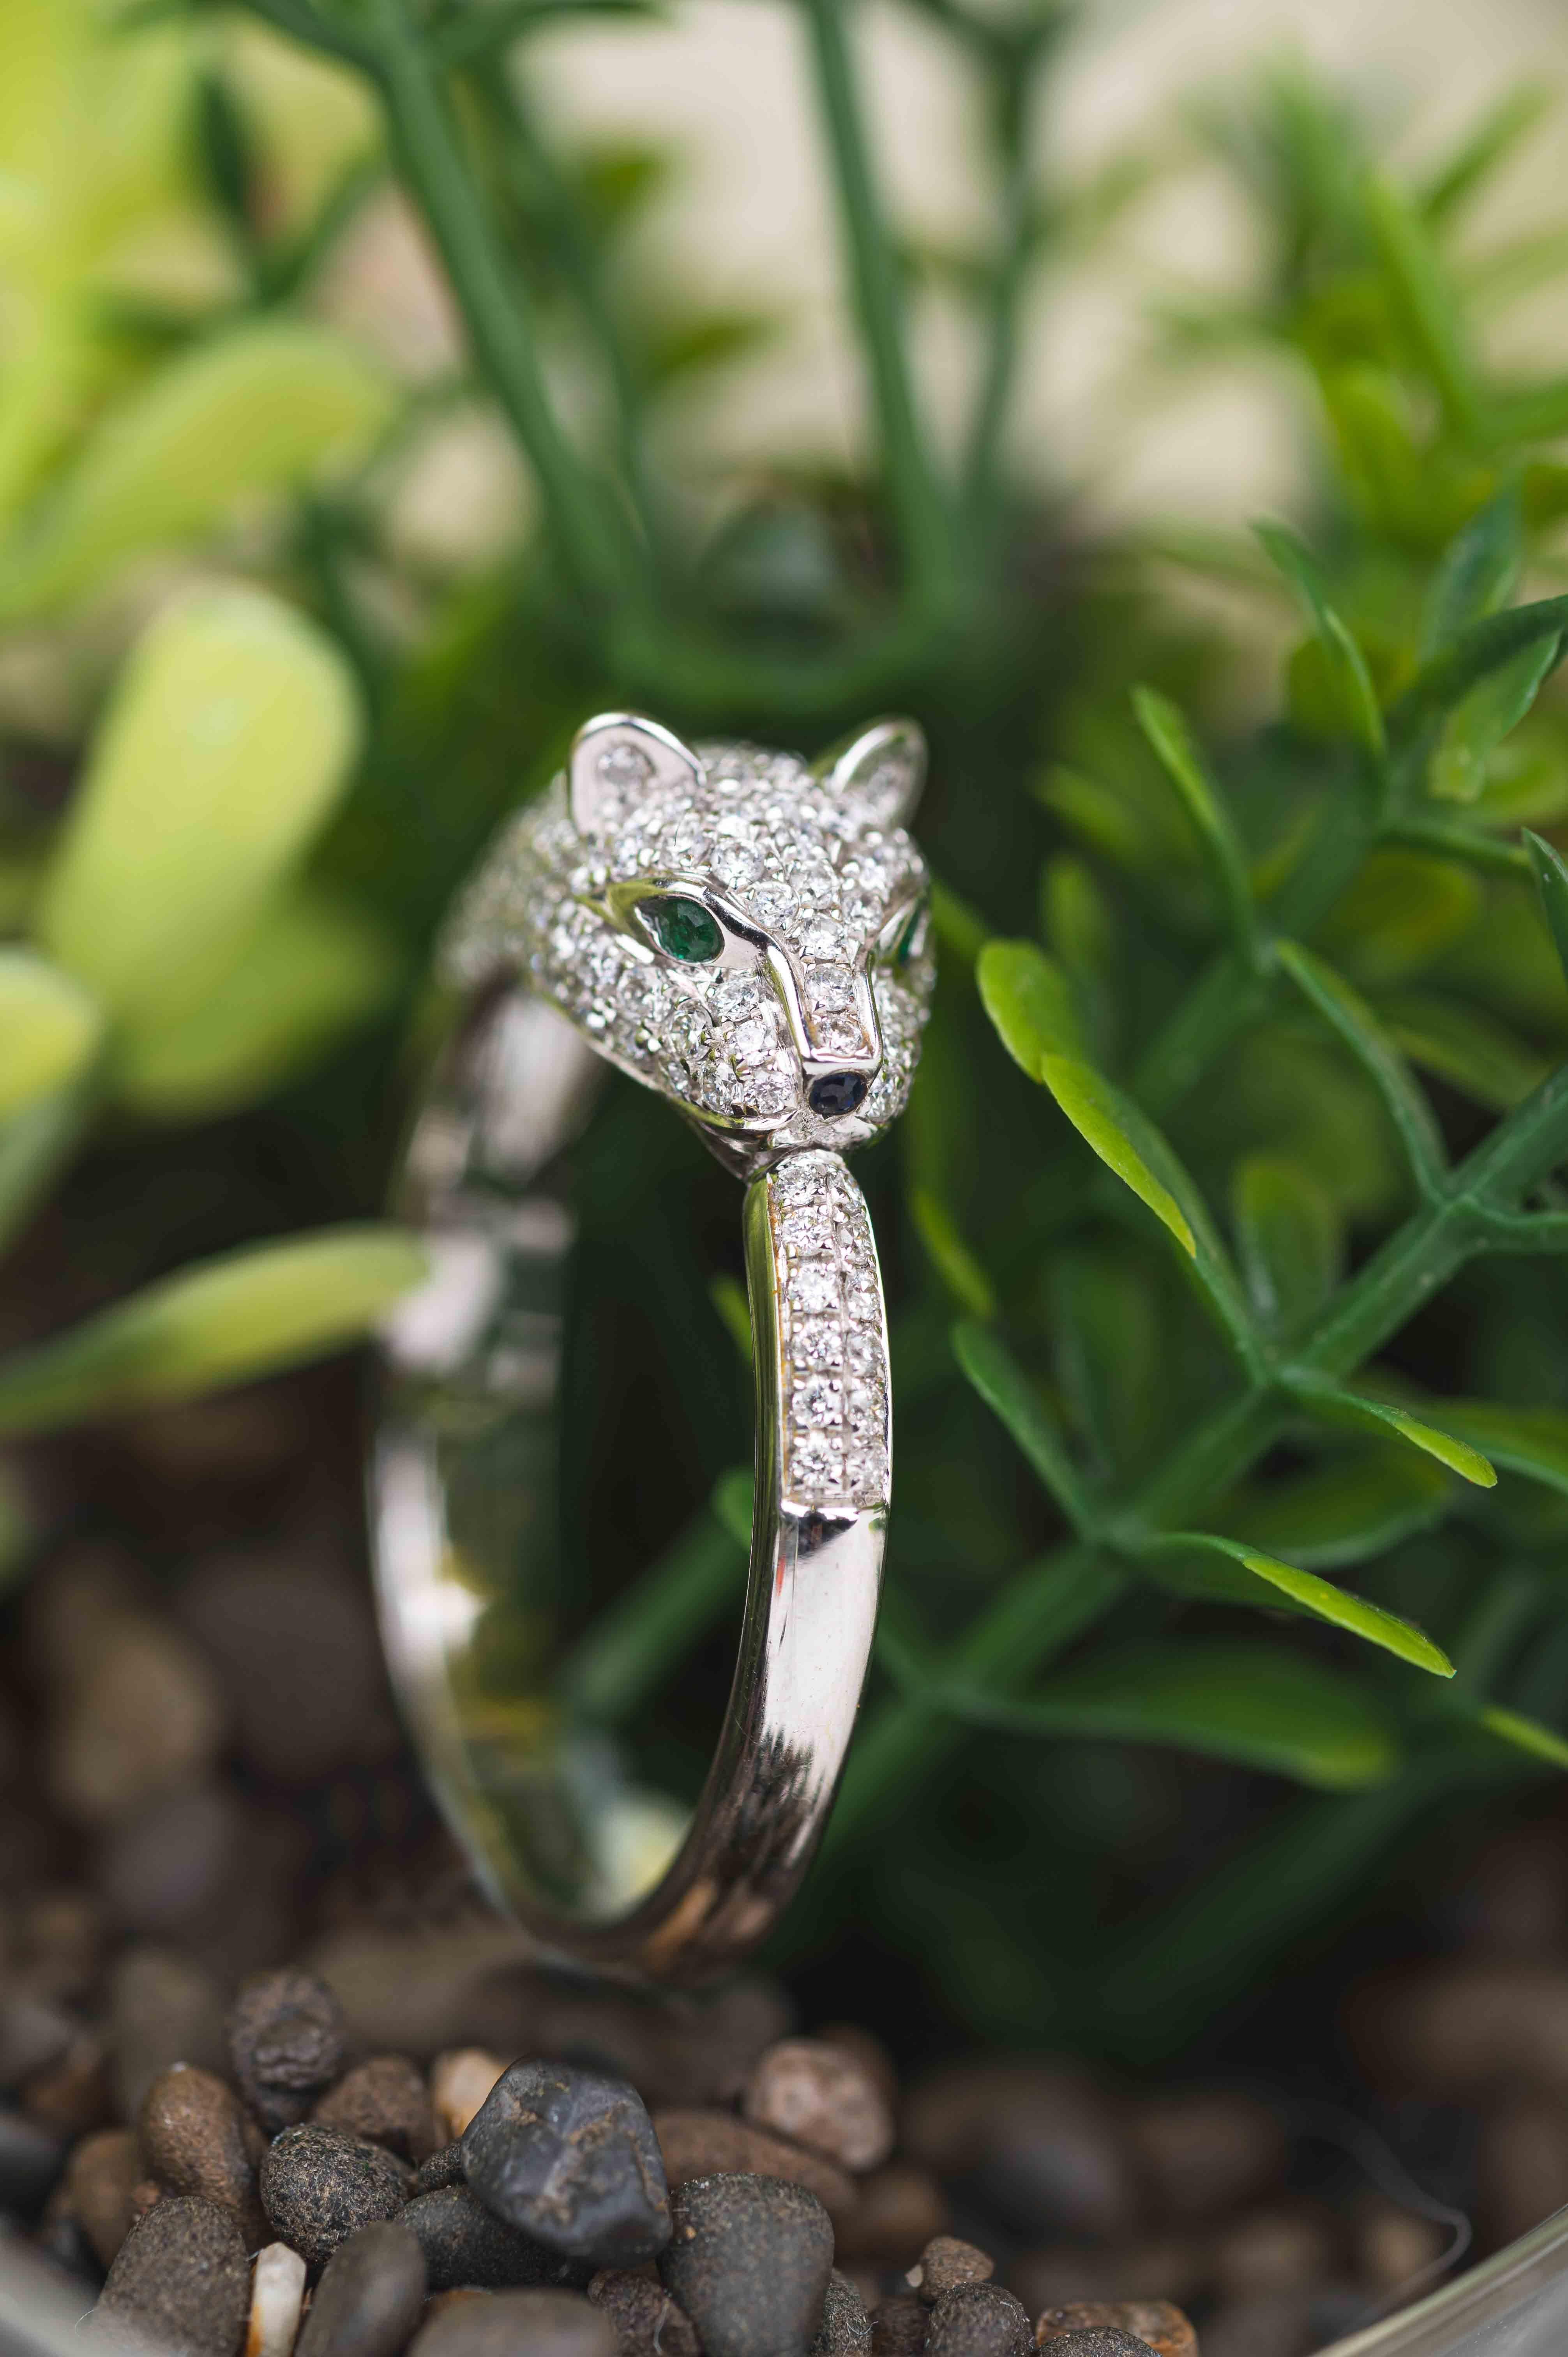 For Sale:  18K White Gold Panther Animal Cocktail Ring with Emerald, Sapphire and Diamonds 9